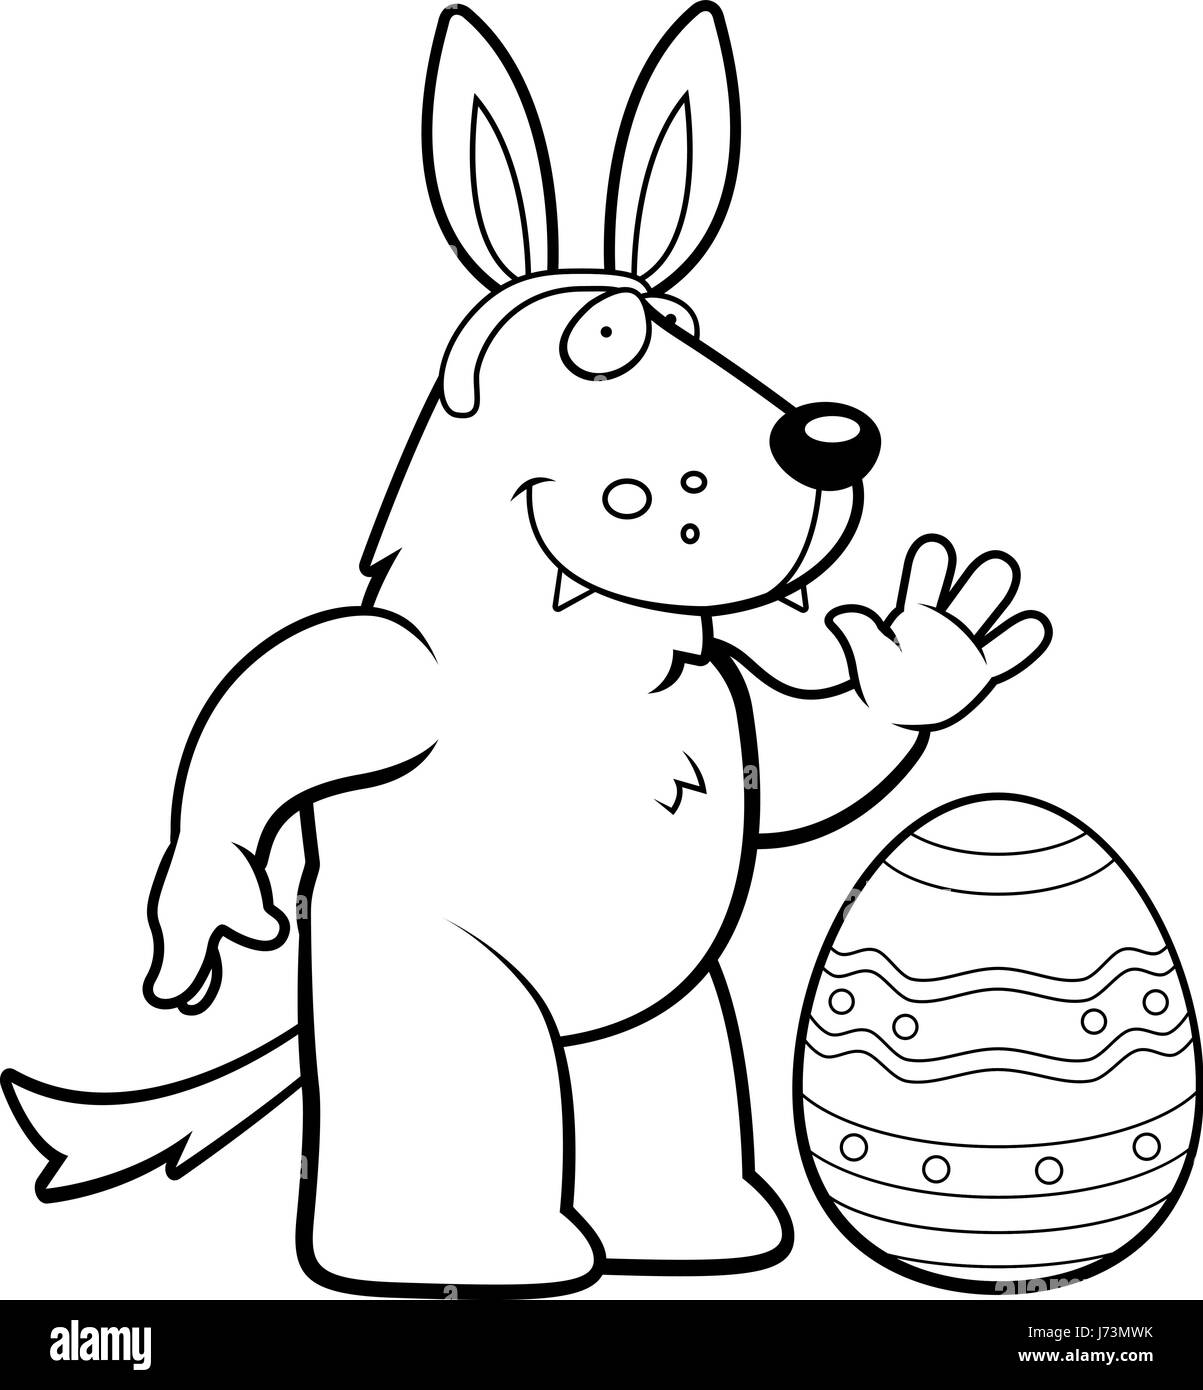 A cartoon wolf with rabbit ears and an Easter egg. Stock Vector